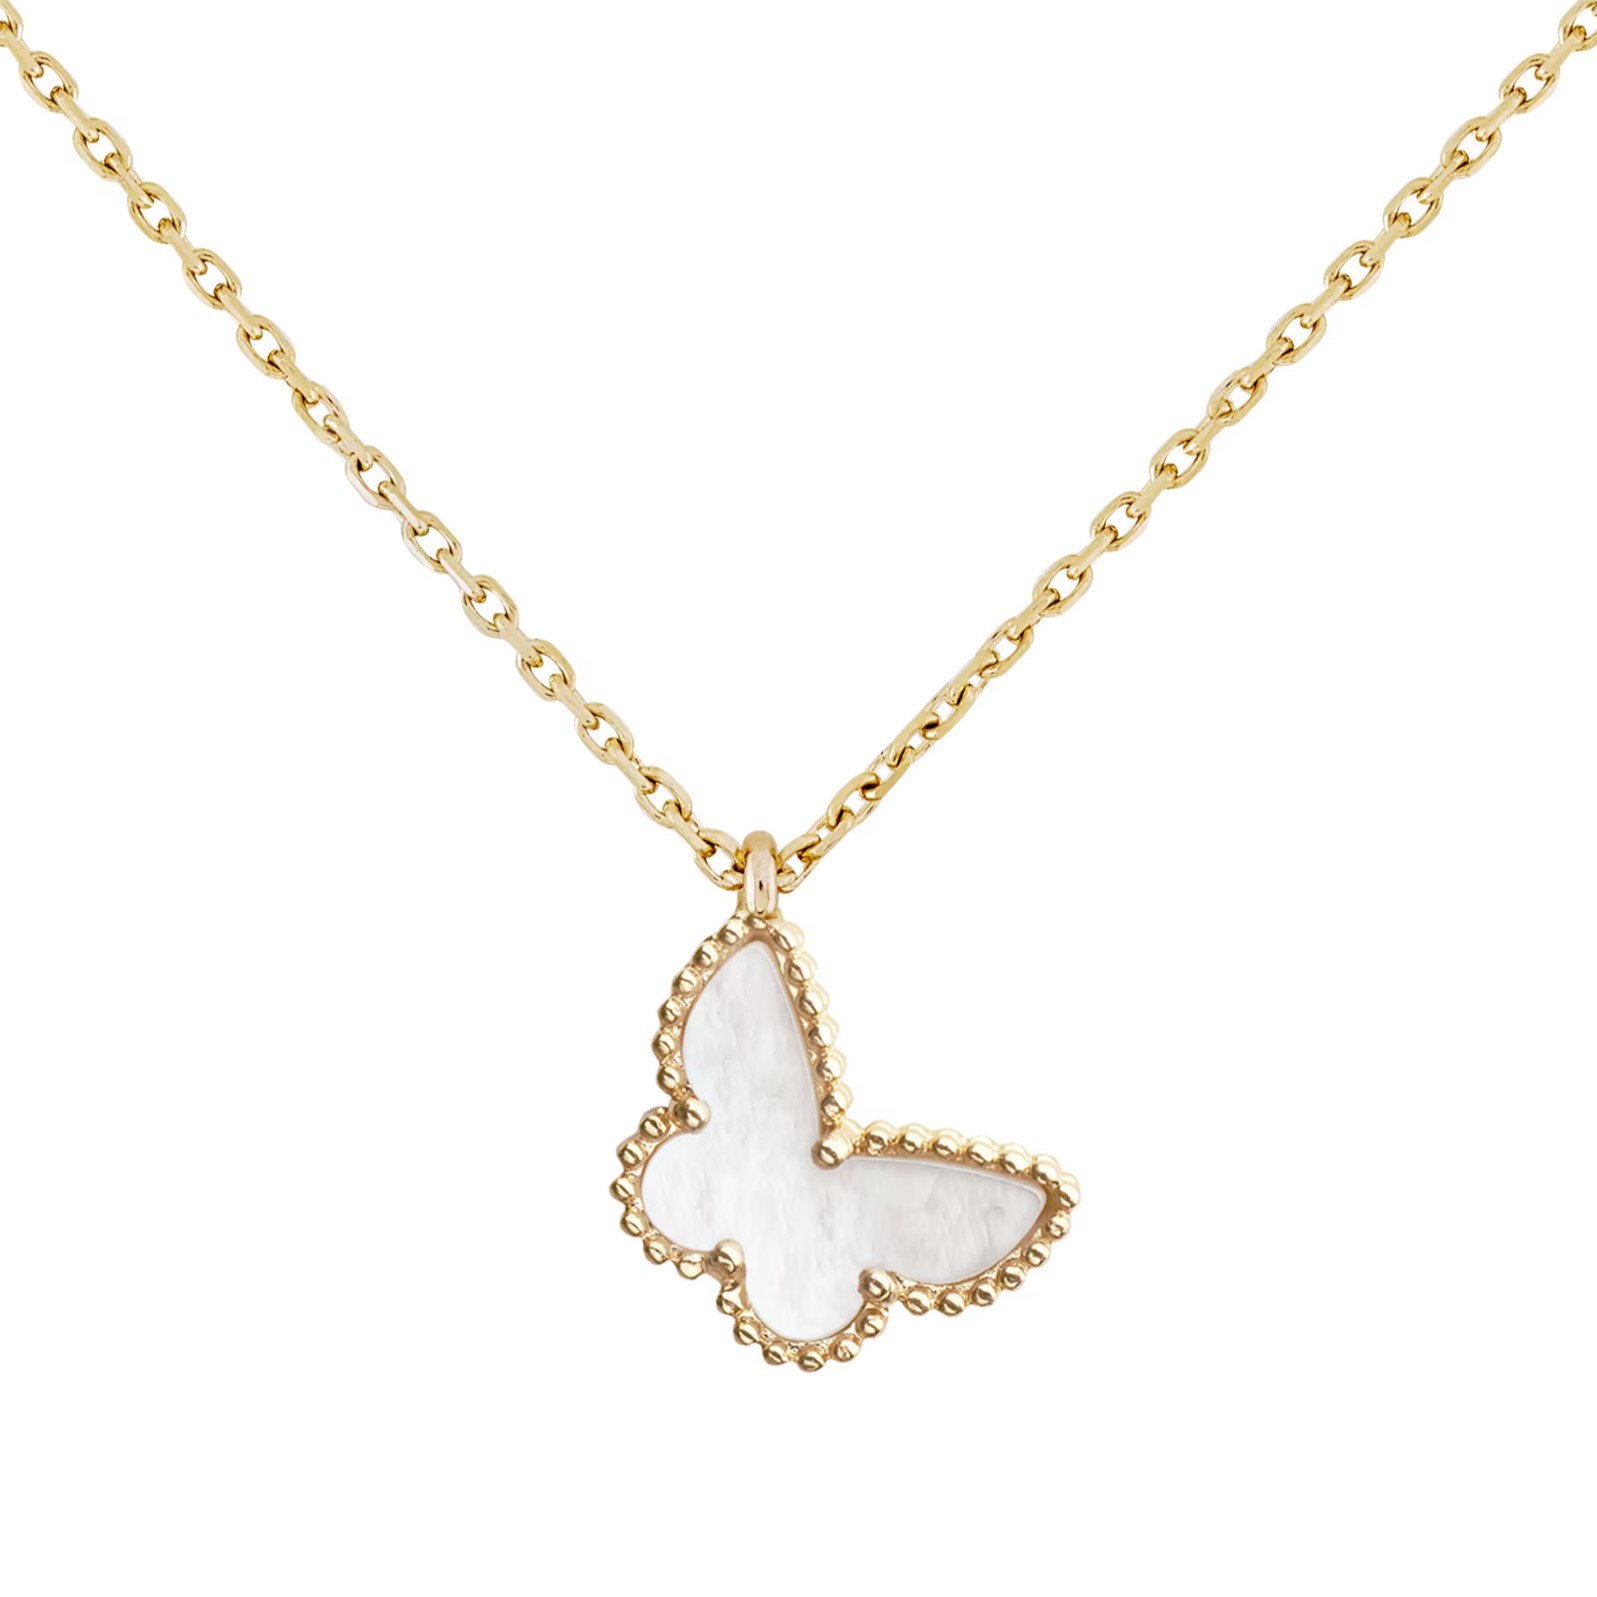 DÂY CHUYỀN NỮ THỜI TRANG VAN CLEEF & ARPELS SWEET ALHAMBRA BUTTERFLY PENDANT 18K YELLOW GOLD WHITE MOTHER OF PEARL VCARF69300 1